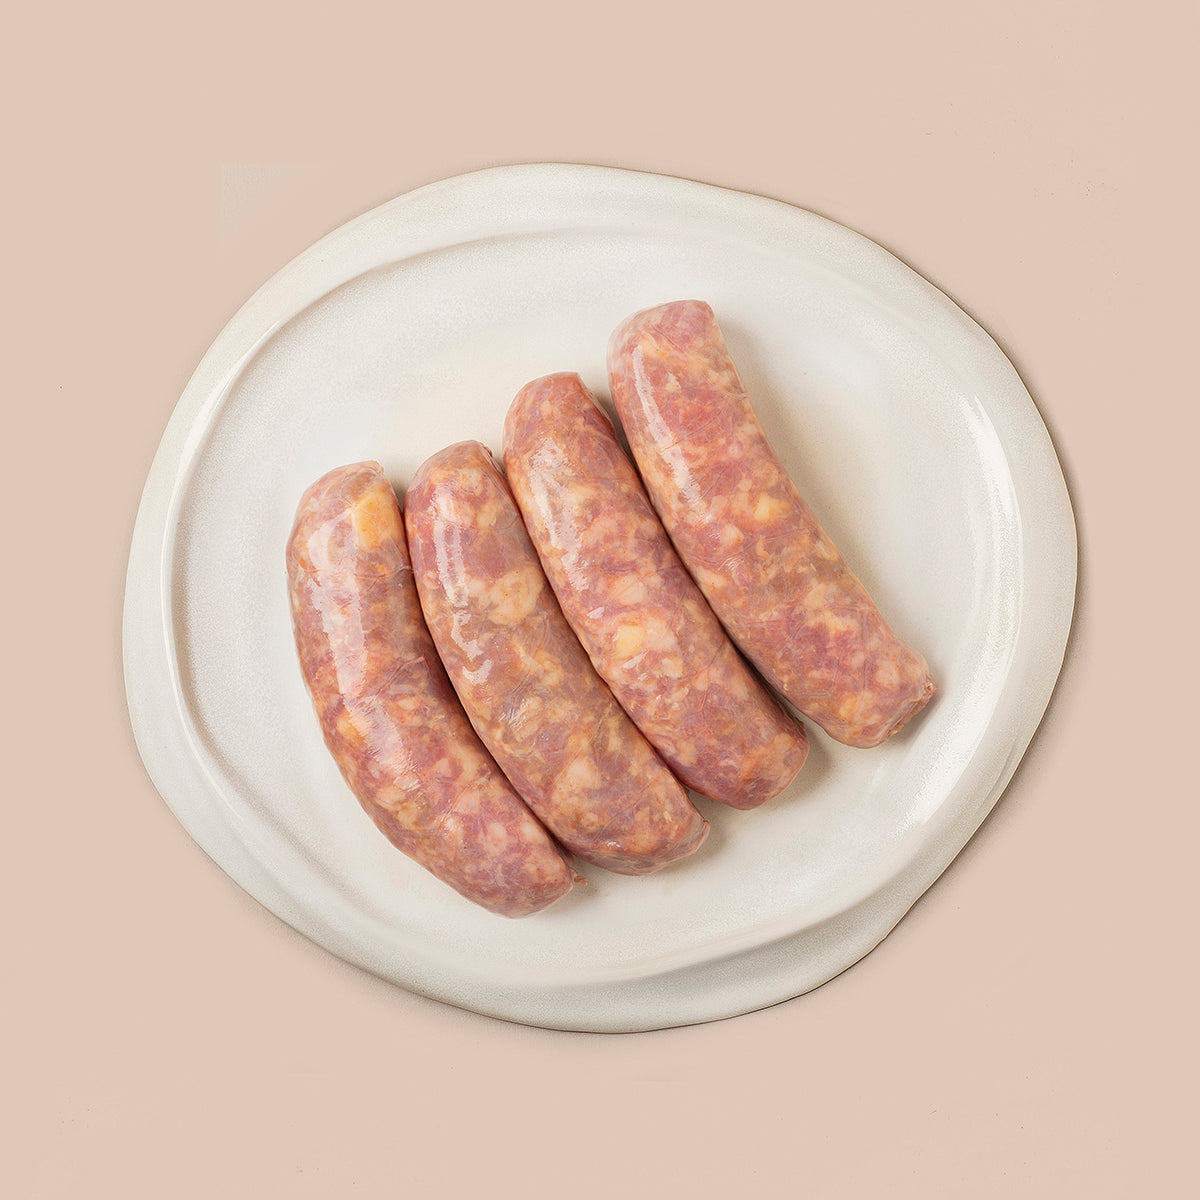 Pork and Cheddar Cheese Sausage